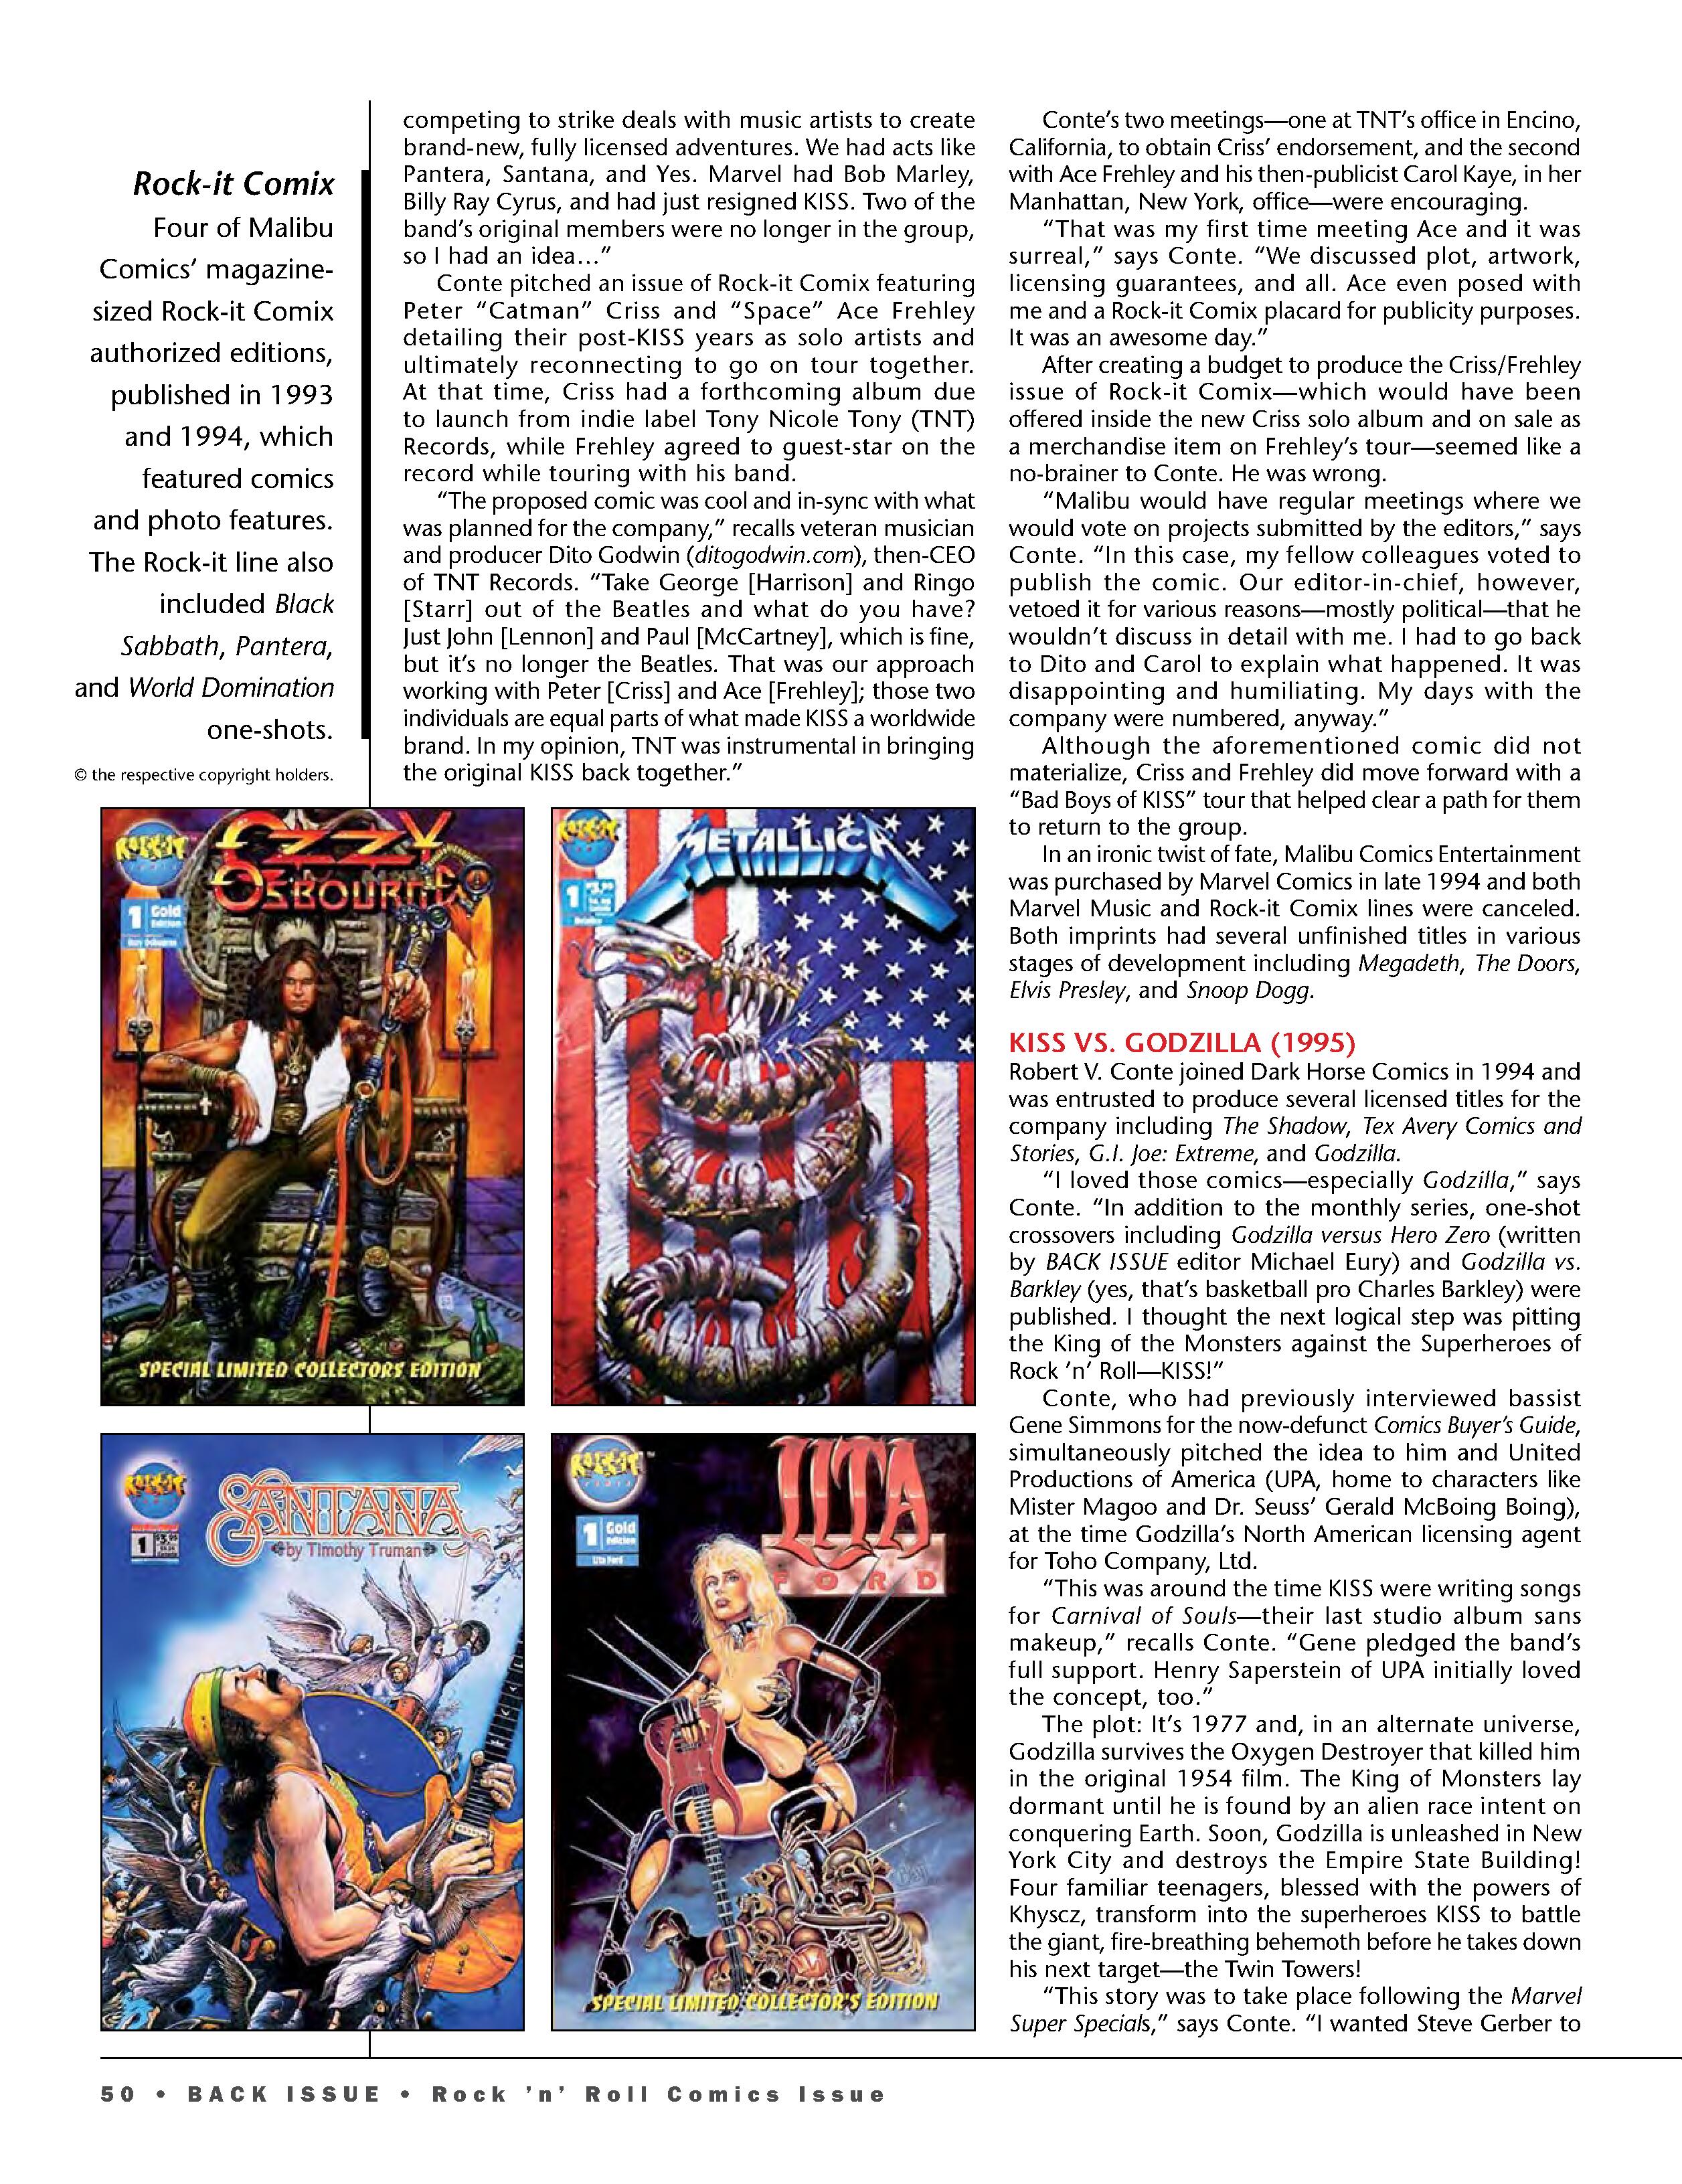 Read online Back Issue comic -  Issue #101 - 52